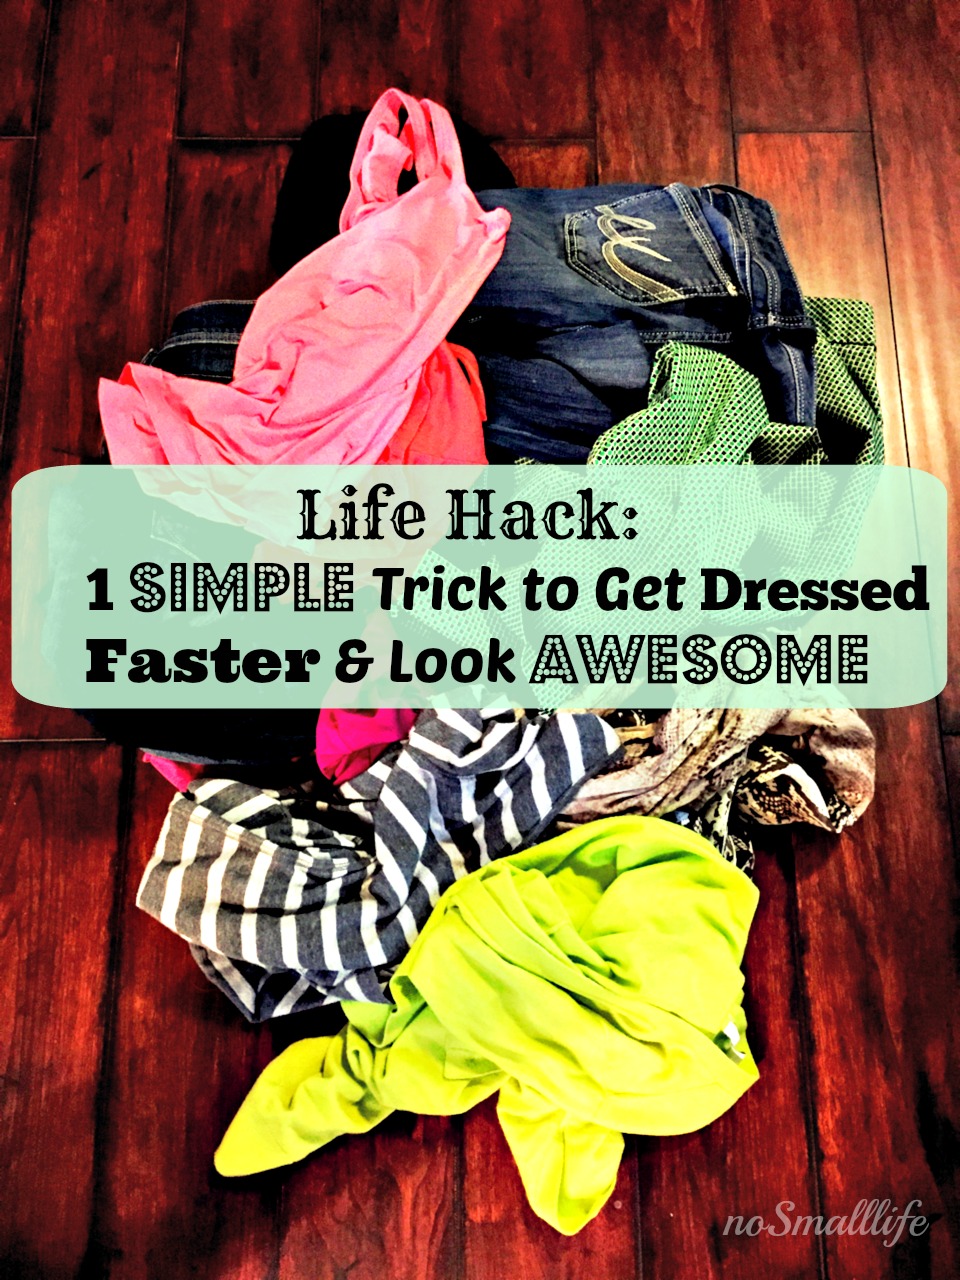 Easy fix to get ready and out the door faster!